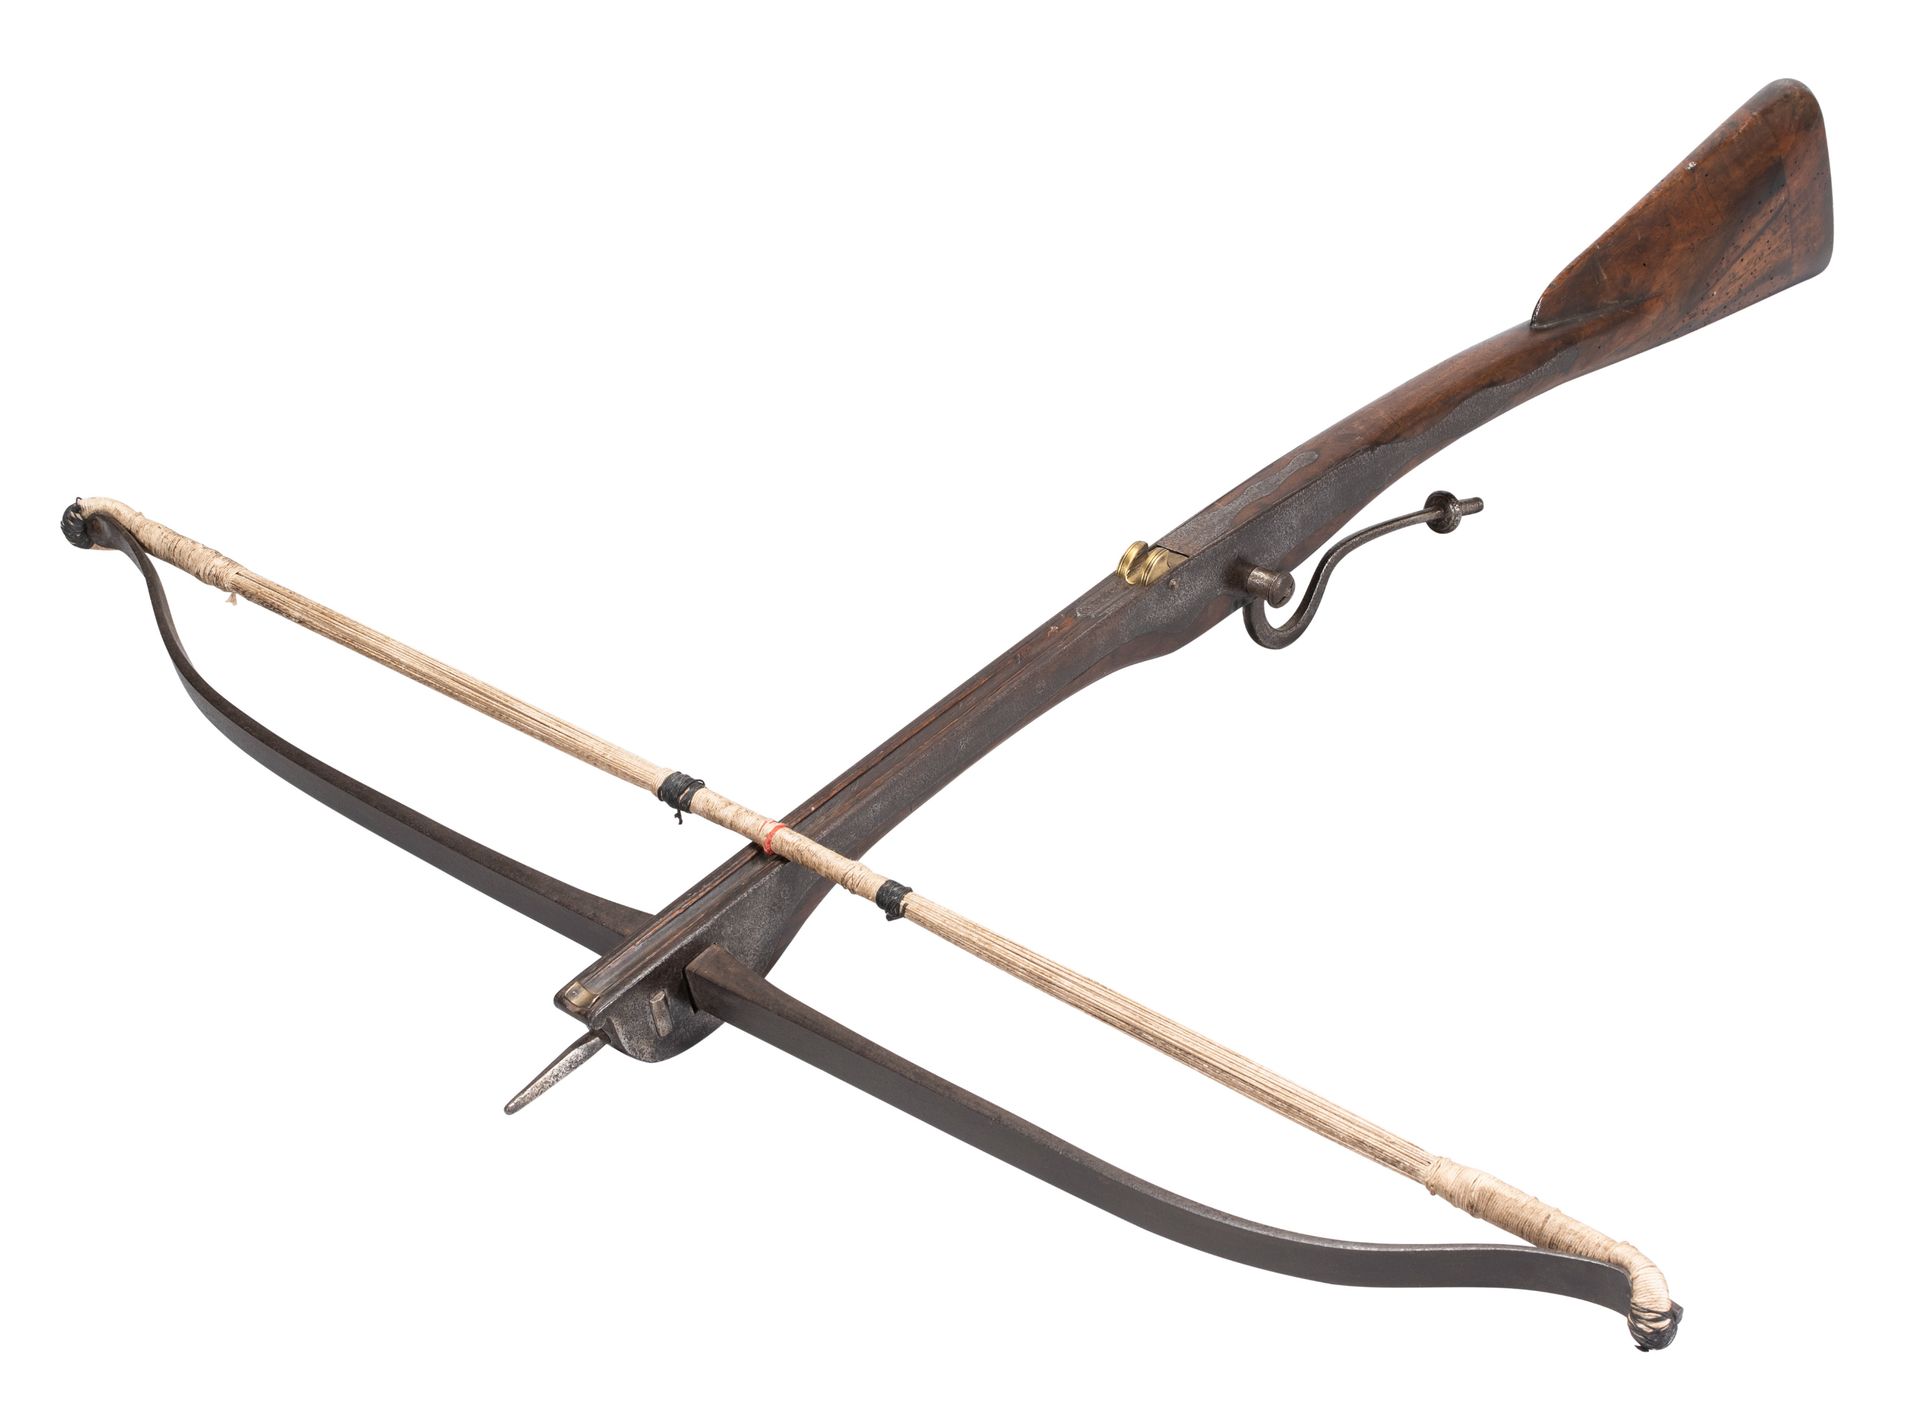 A LARGE NORTH EUROPEAN CROSSBOW, EARLY 19TH CENTURY, PROBABLY FLEMISH EINE GROSS&hellip;